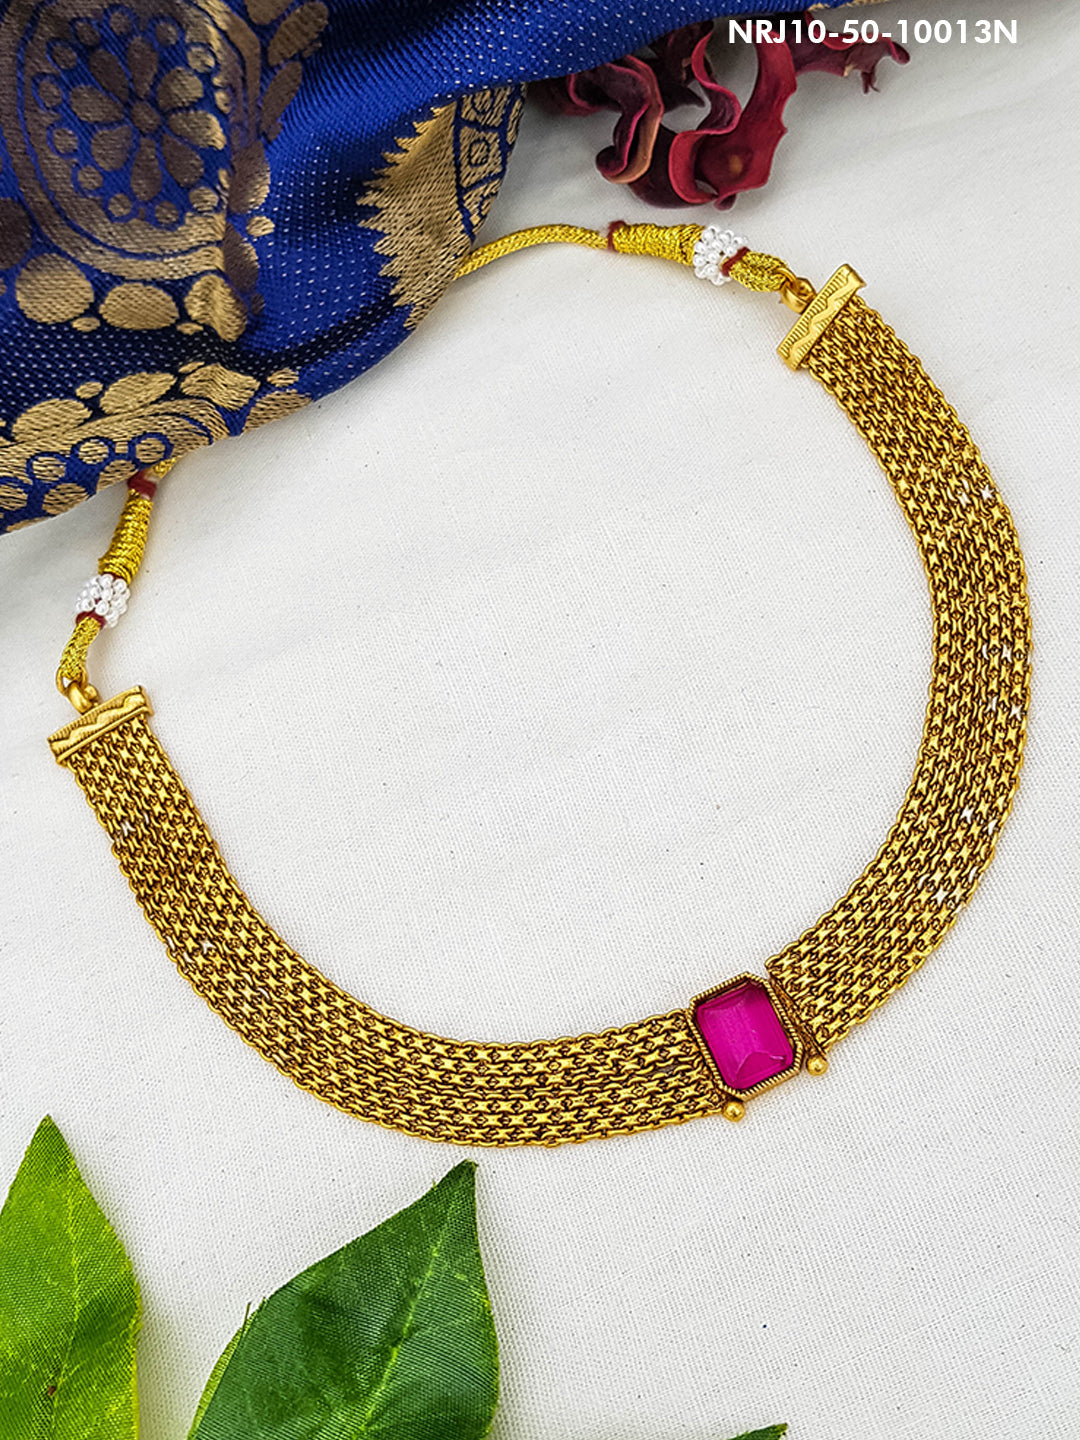 Gold Plated Chic Necklace with AD Stones 10013N